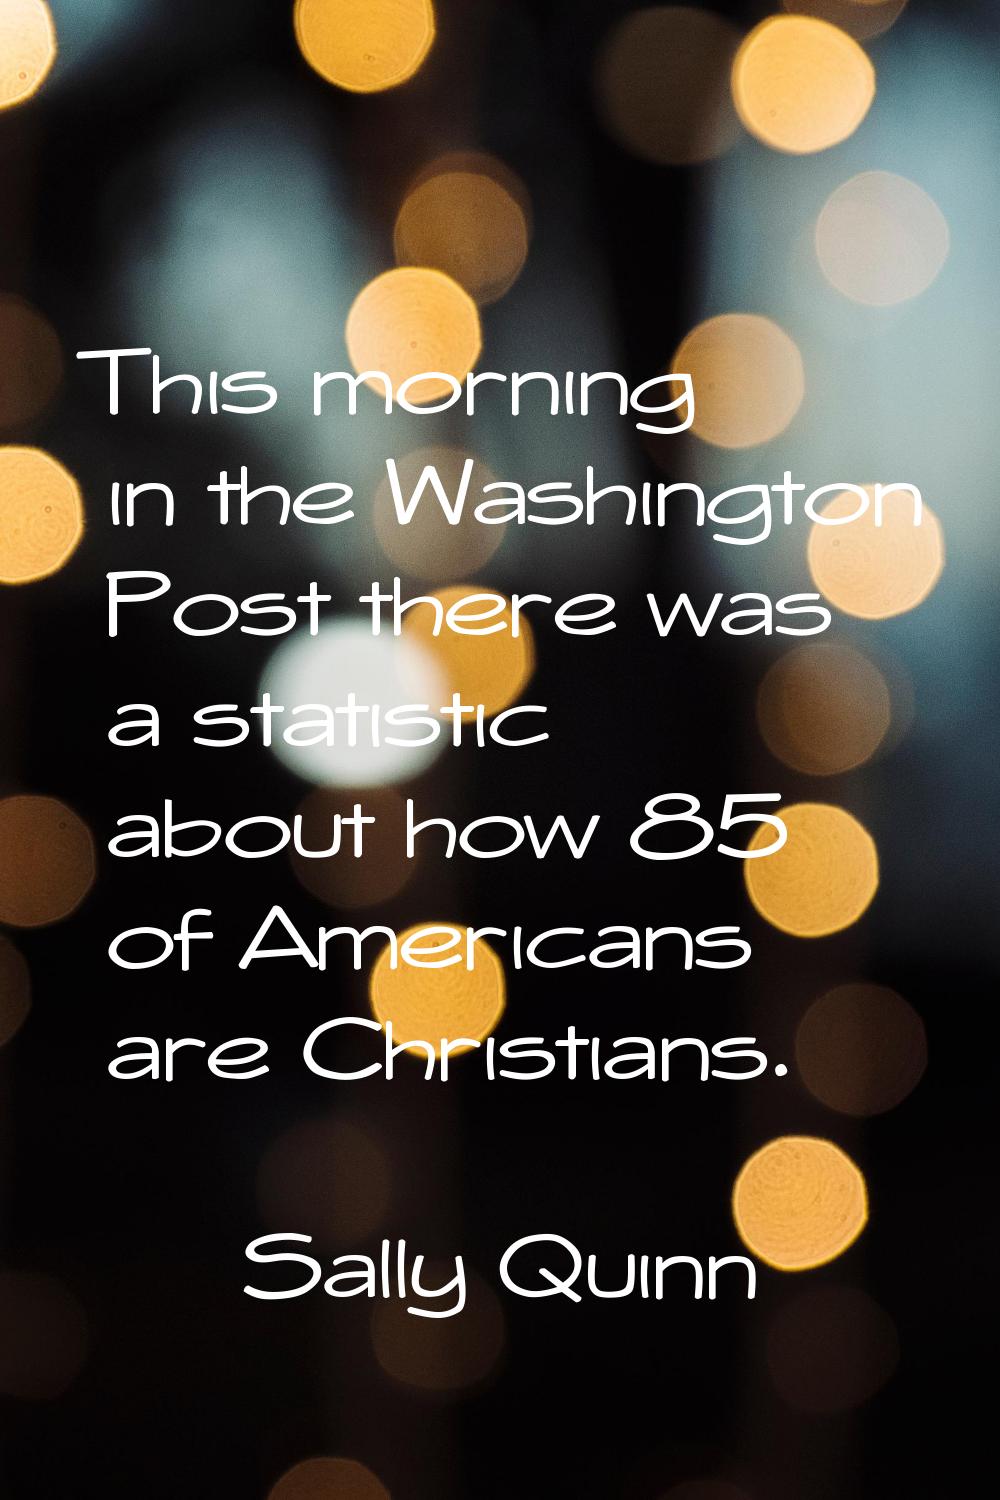 This morning in the Washington Post there was a statistic about how 85% of Americans are Christians